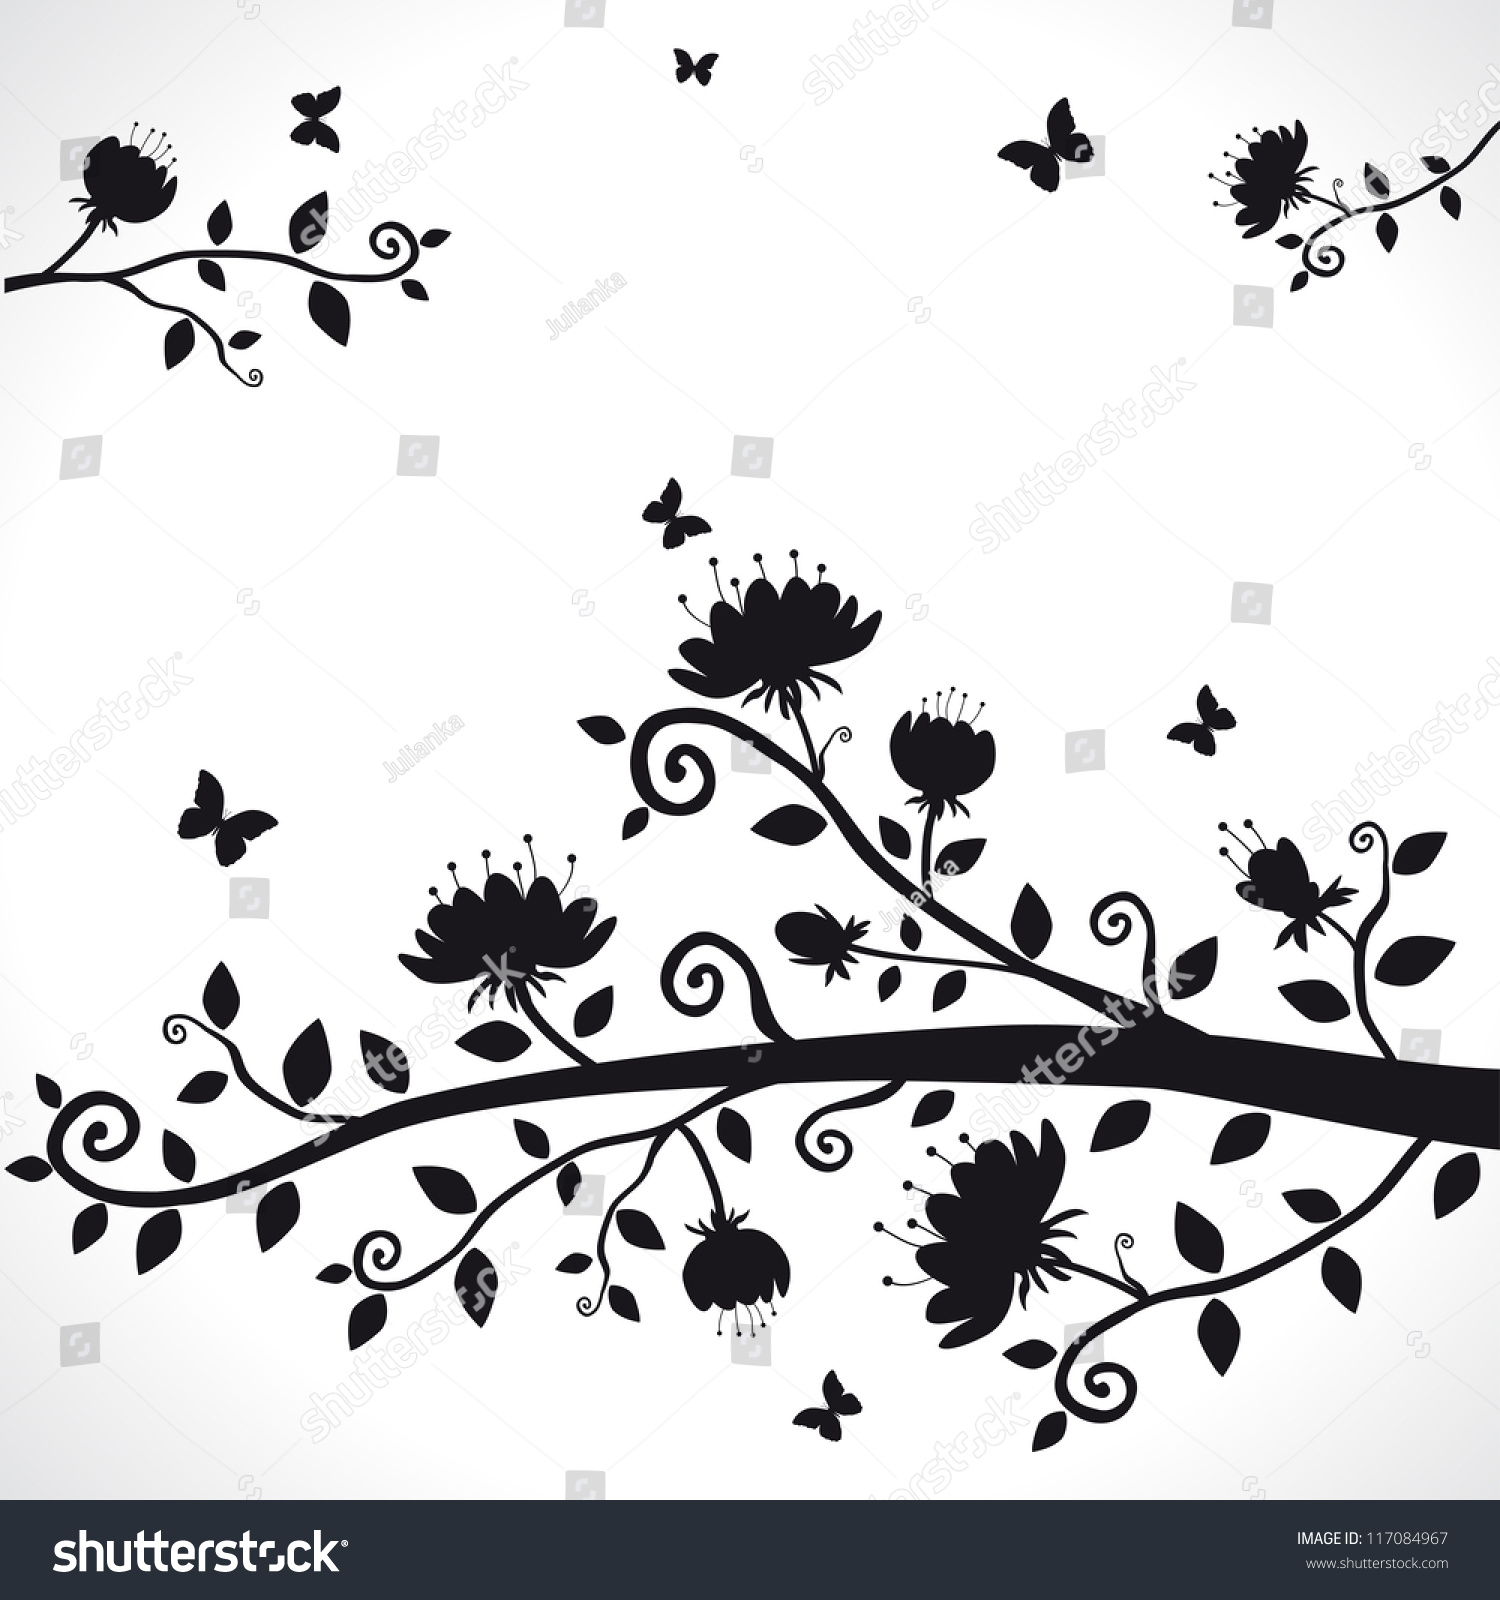 Vector Silhouette Of The Branch With Beautiful Flowers - 117084967